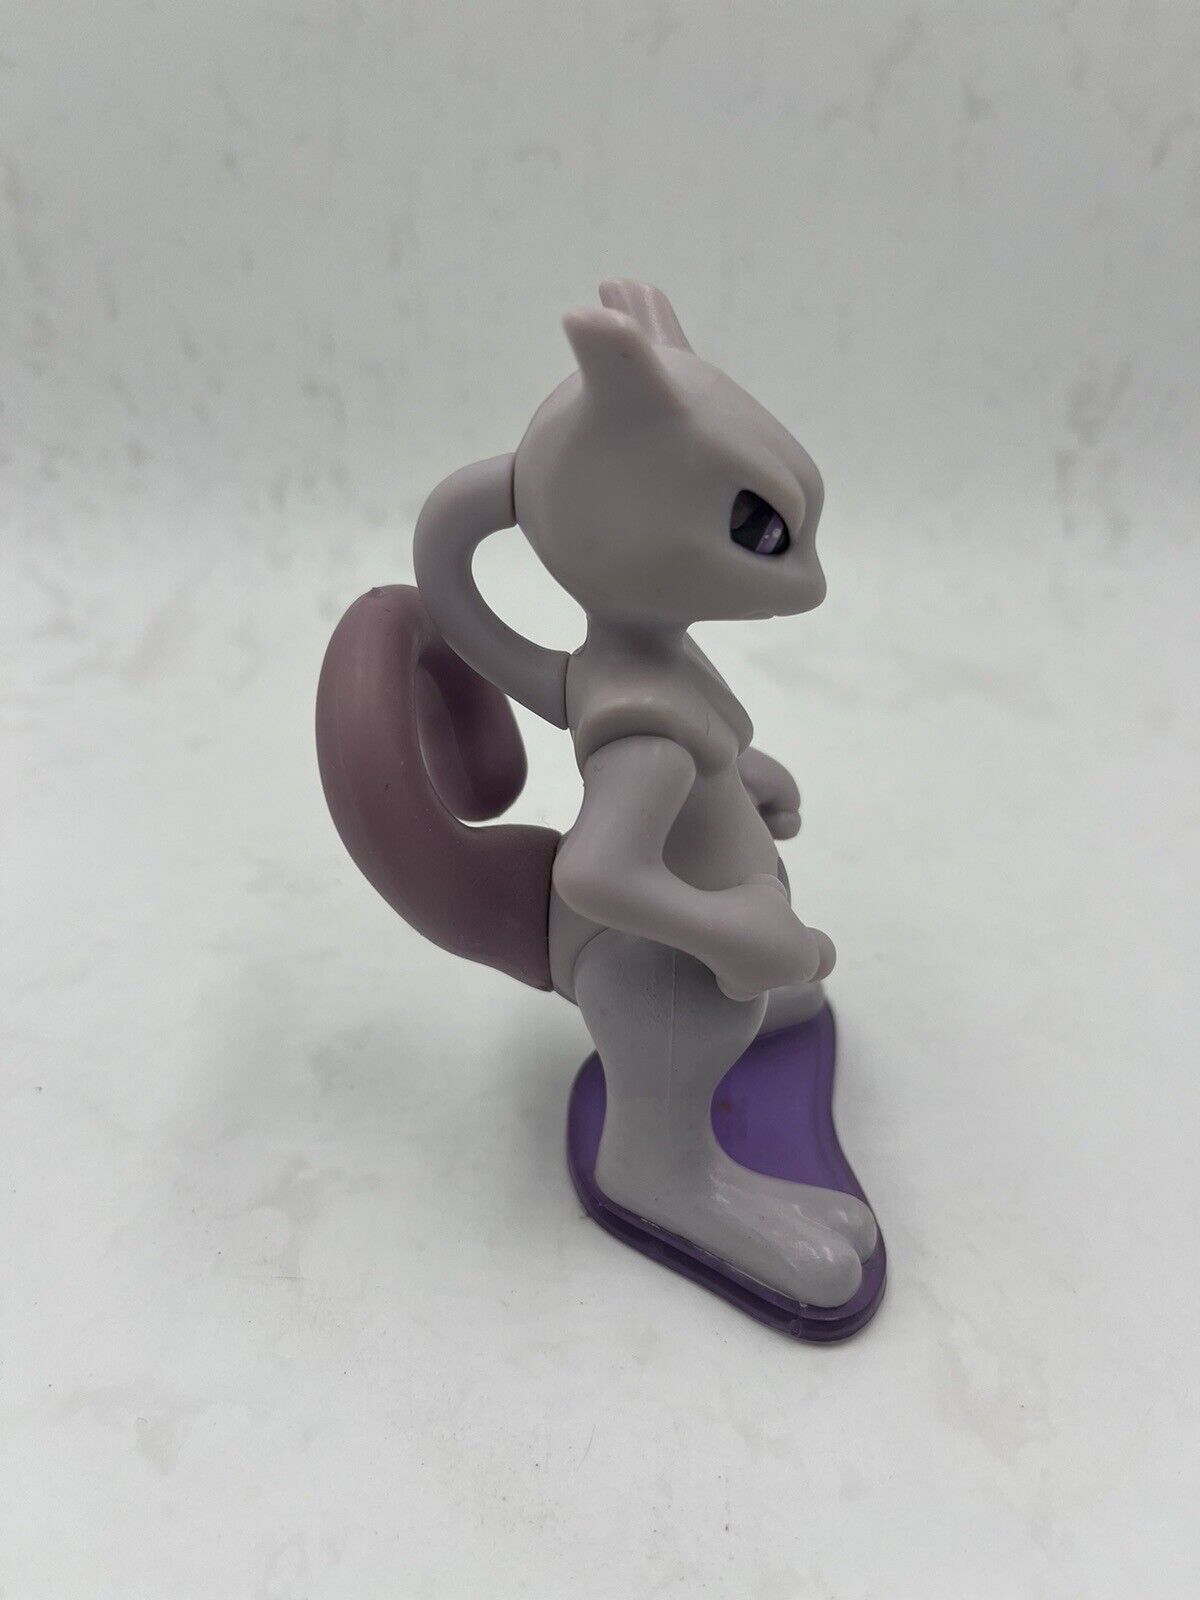 1999 Nintendo Burger King 4 inch Pokemon MewTwo Figure Toy Discontinued Vintage